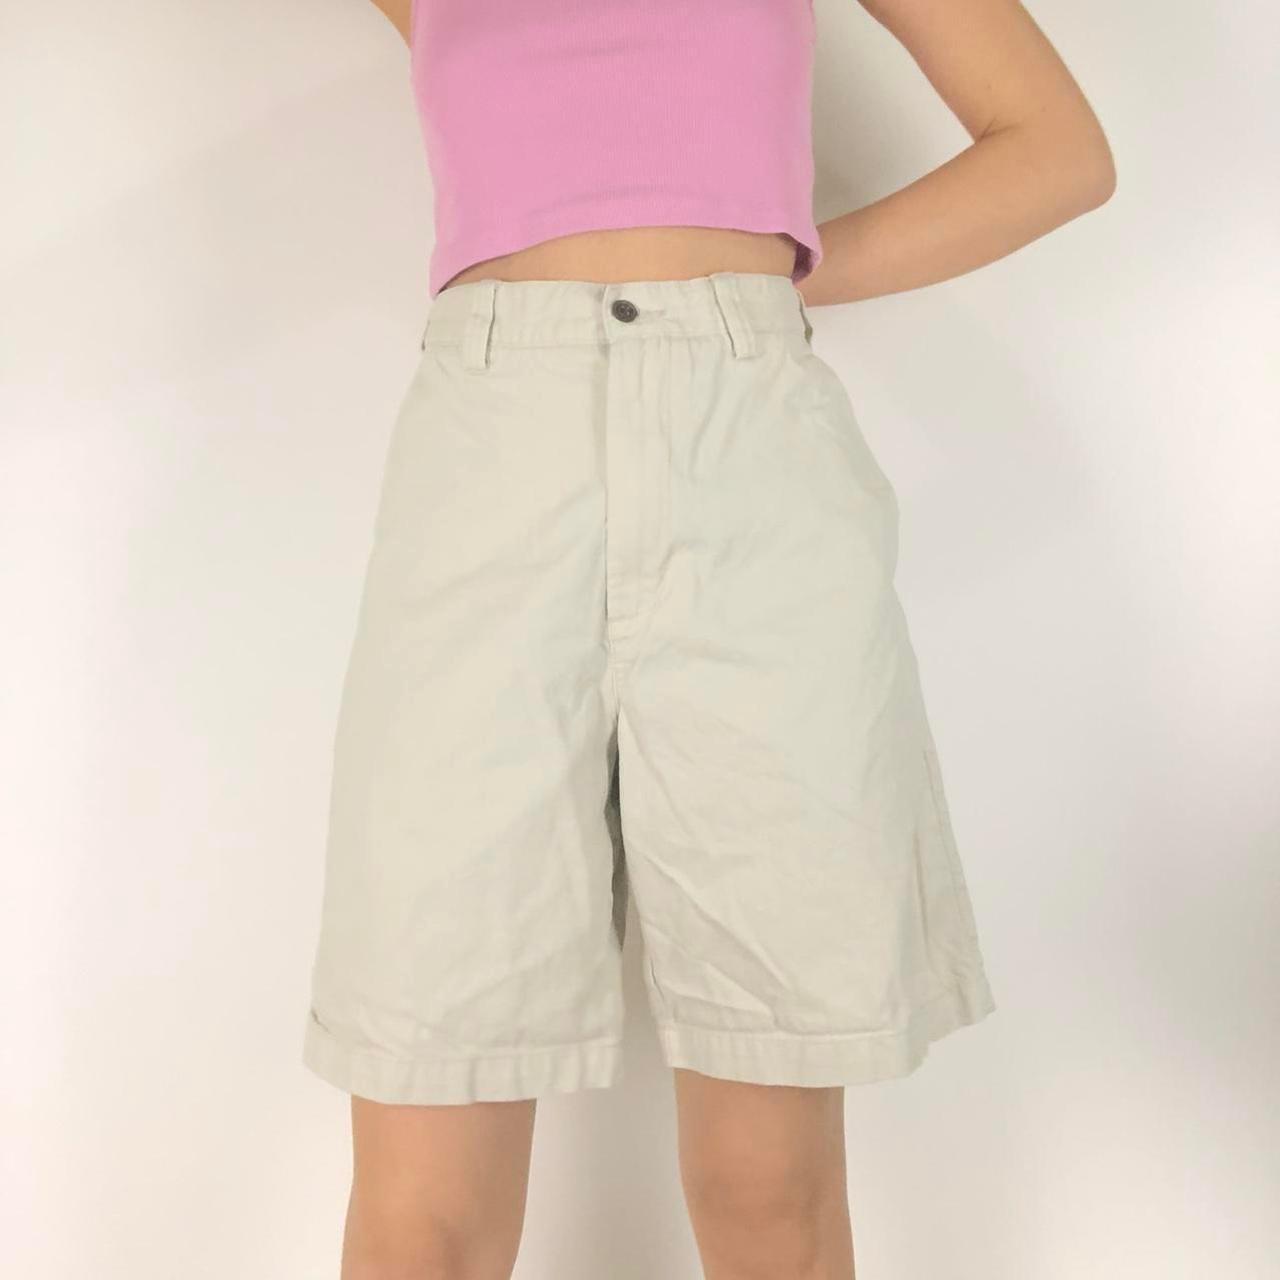 Product Image 4 - High waisted beige long shorts

These